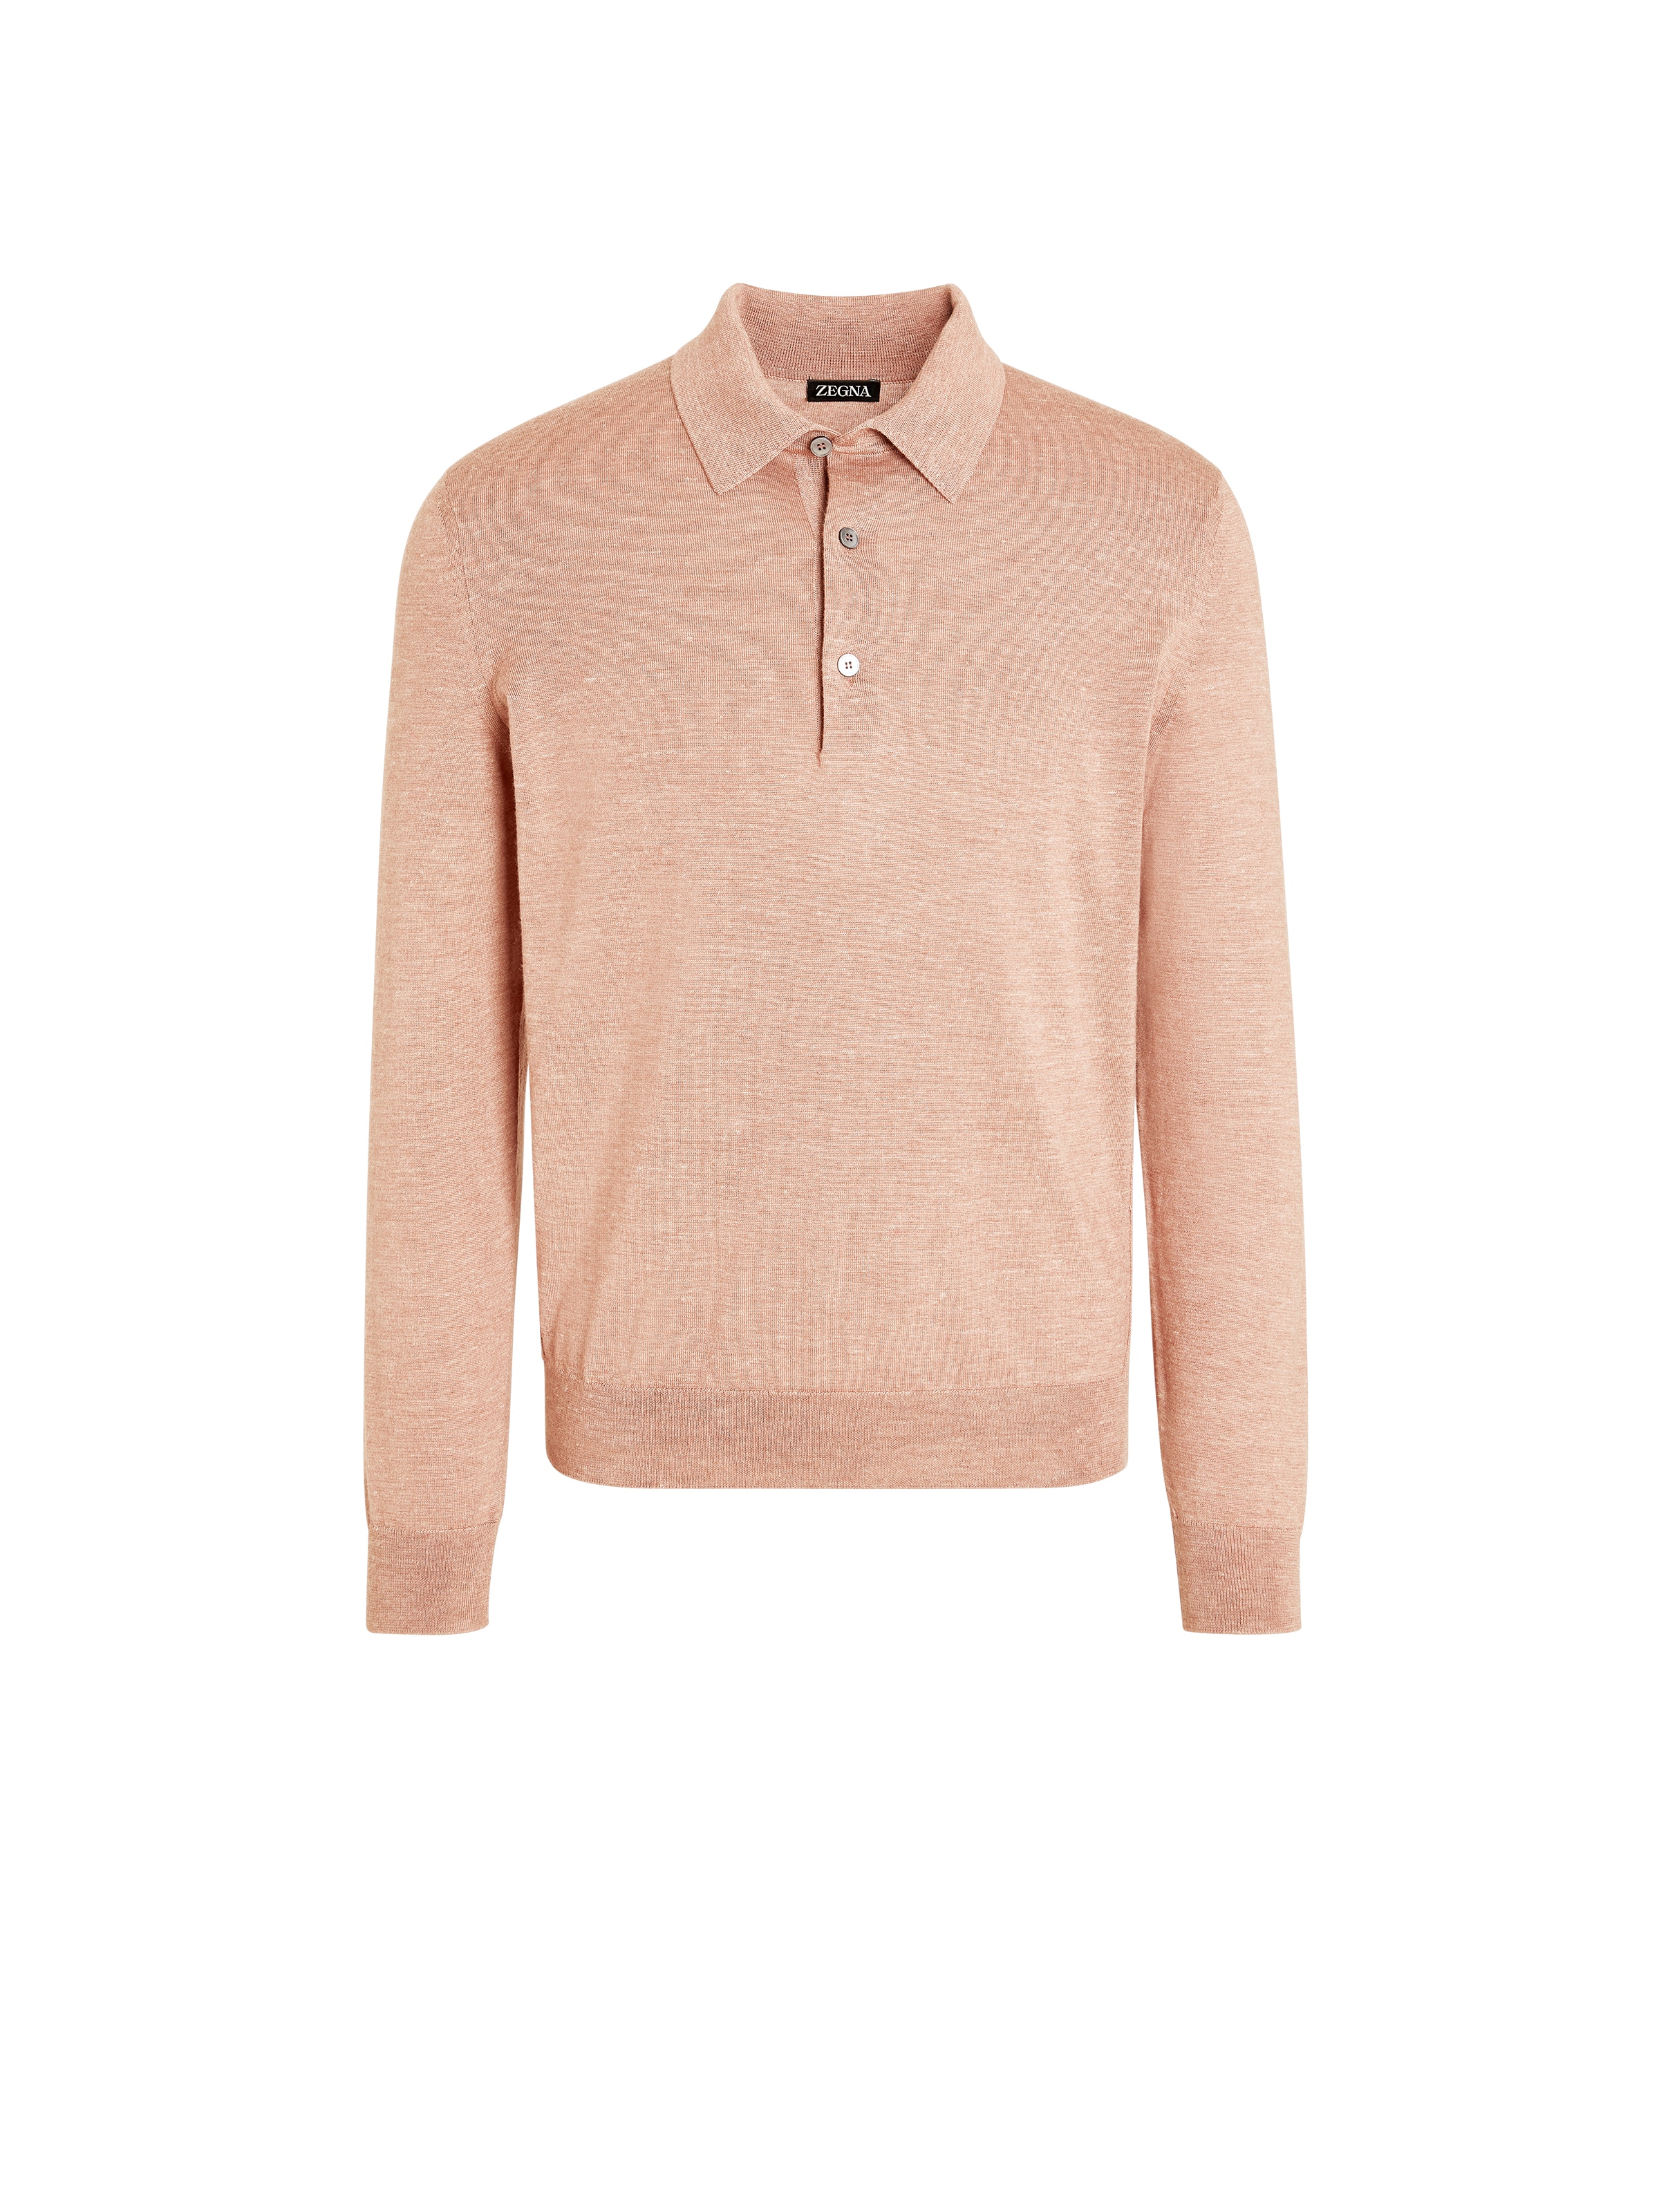 Zegna Dust Pink Silk Cashmere And Linen Polo Shirt